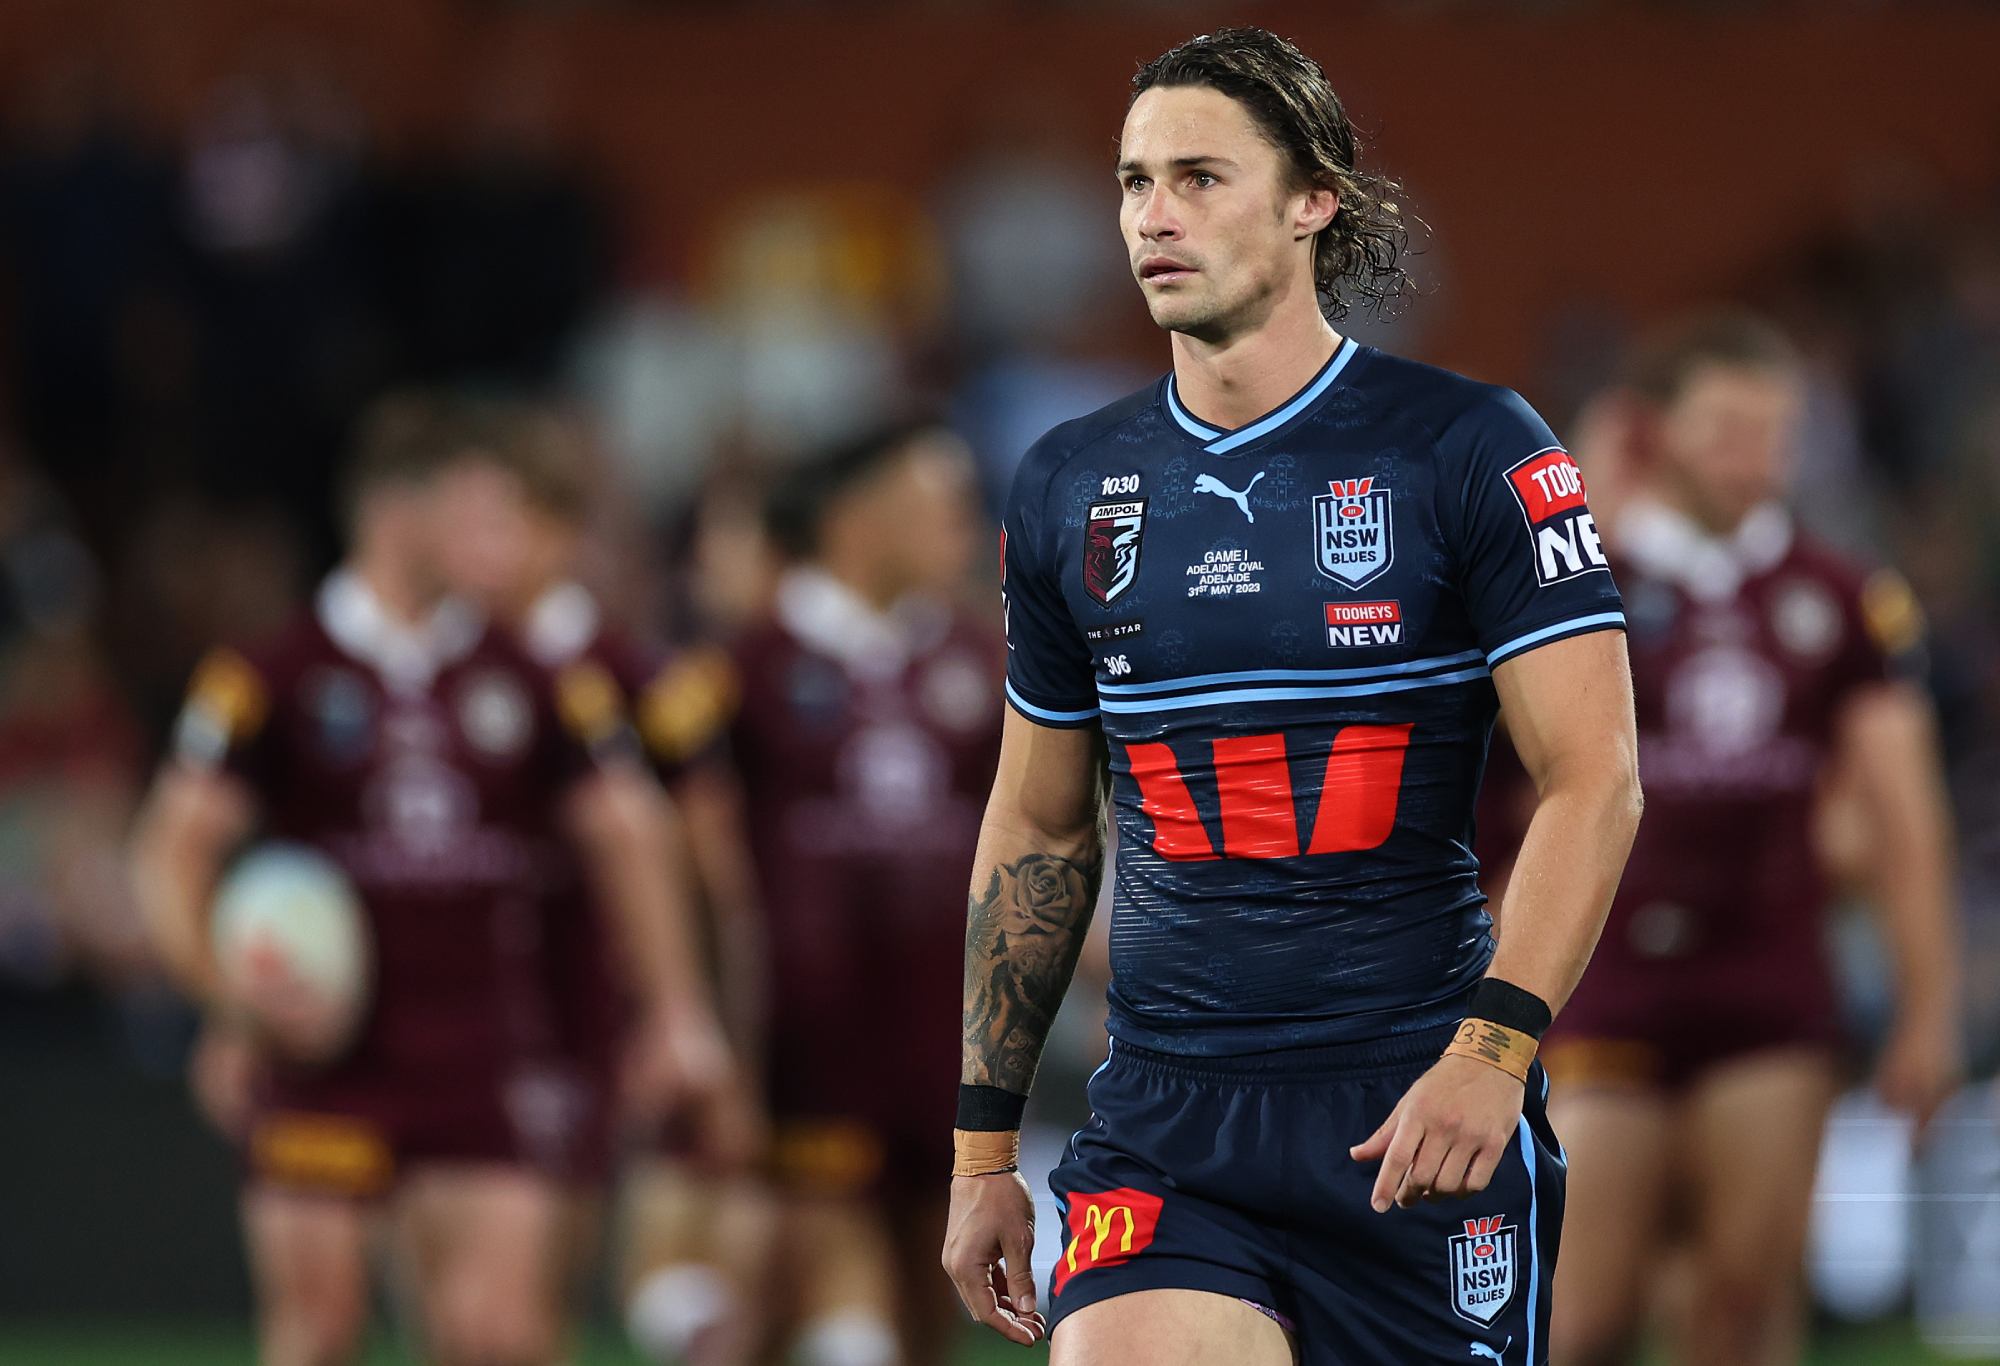 ADELAIDE, AUSTRALIA - MAY 31: Nicholas Hynes of the Blues looks dejected during game one of the 2023 State of Origin series between the Queensland Maroons and New South Wales Blues at Adelaide Oval on May 31, 2023 in Adelaide, Australia. (Photo by Mark Kolbe/Getty Images)